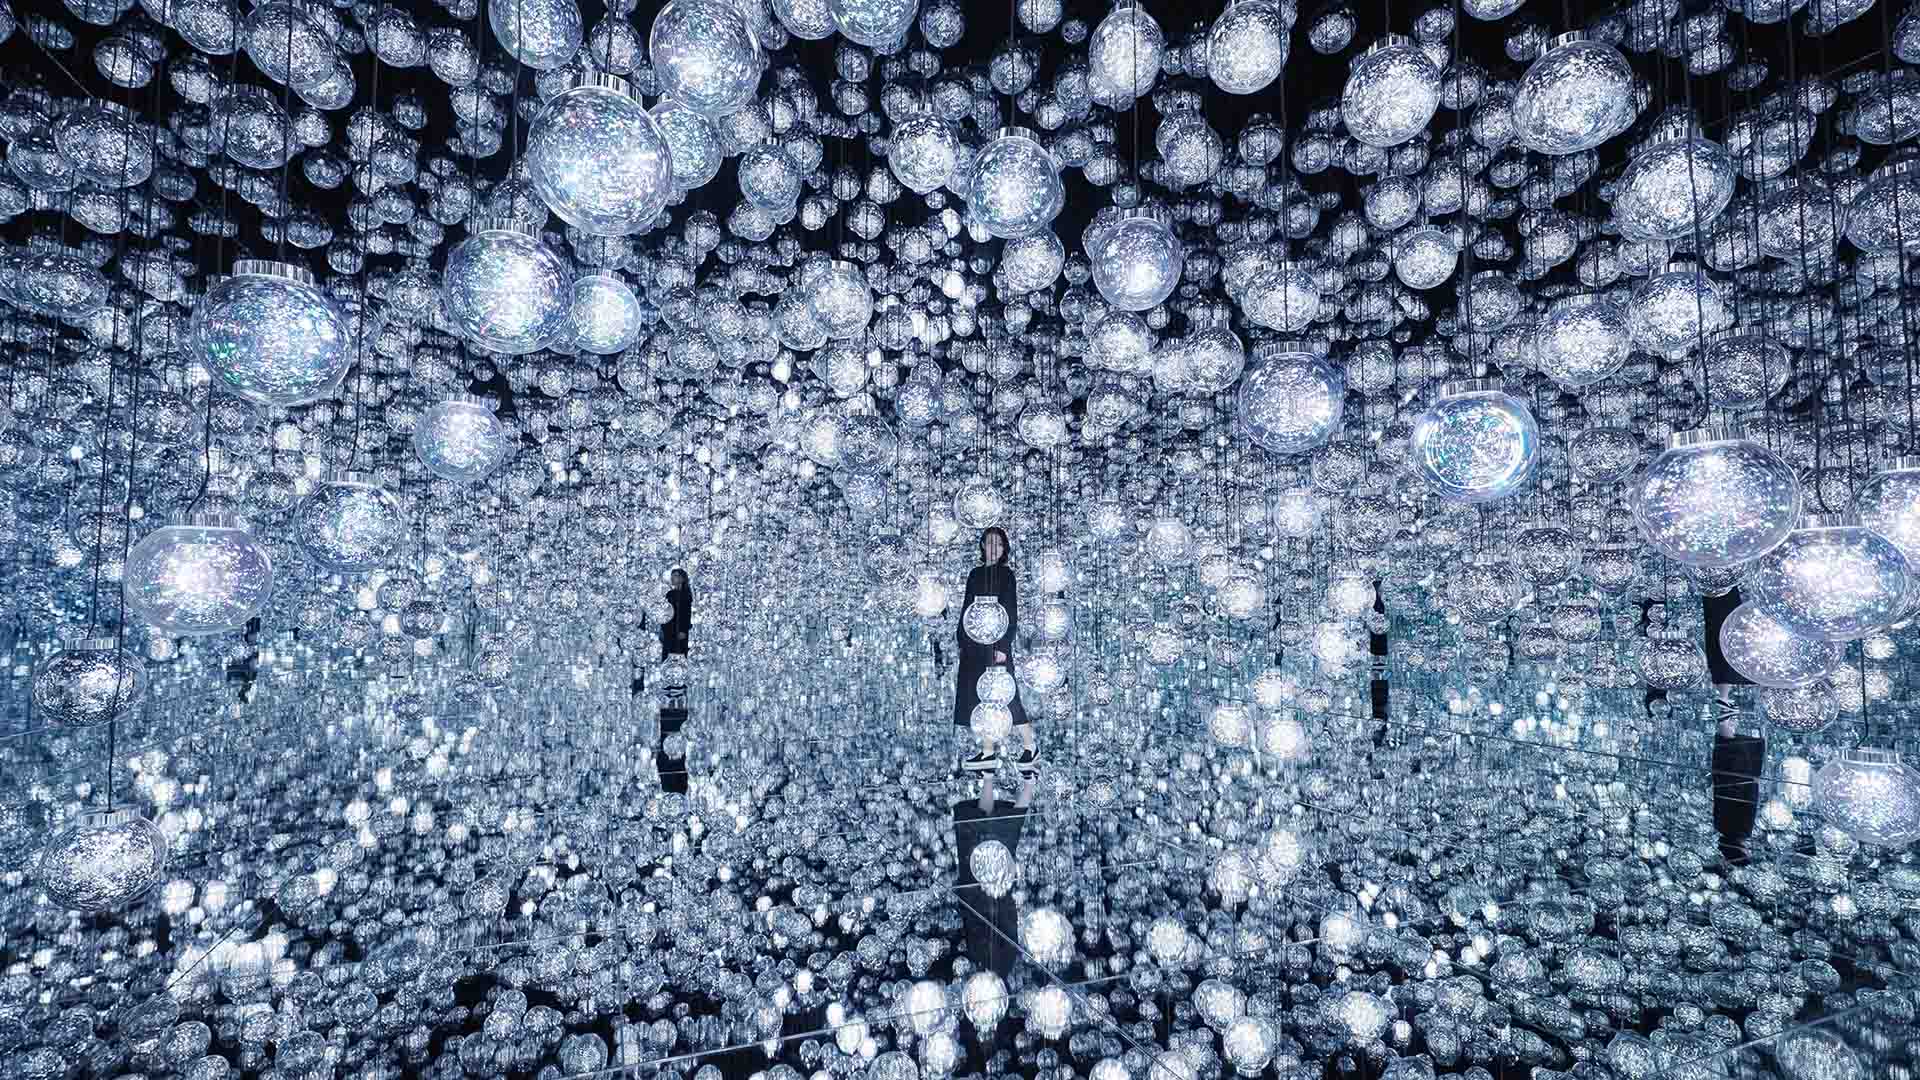 Tokyo's TeamLab Borderless Digital Art Gallery Is Reopening in February with Dazzling New Installations